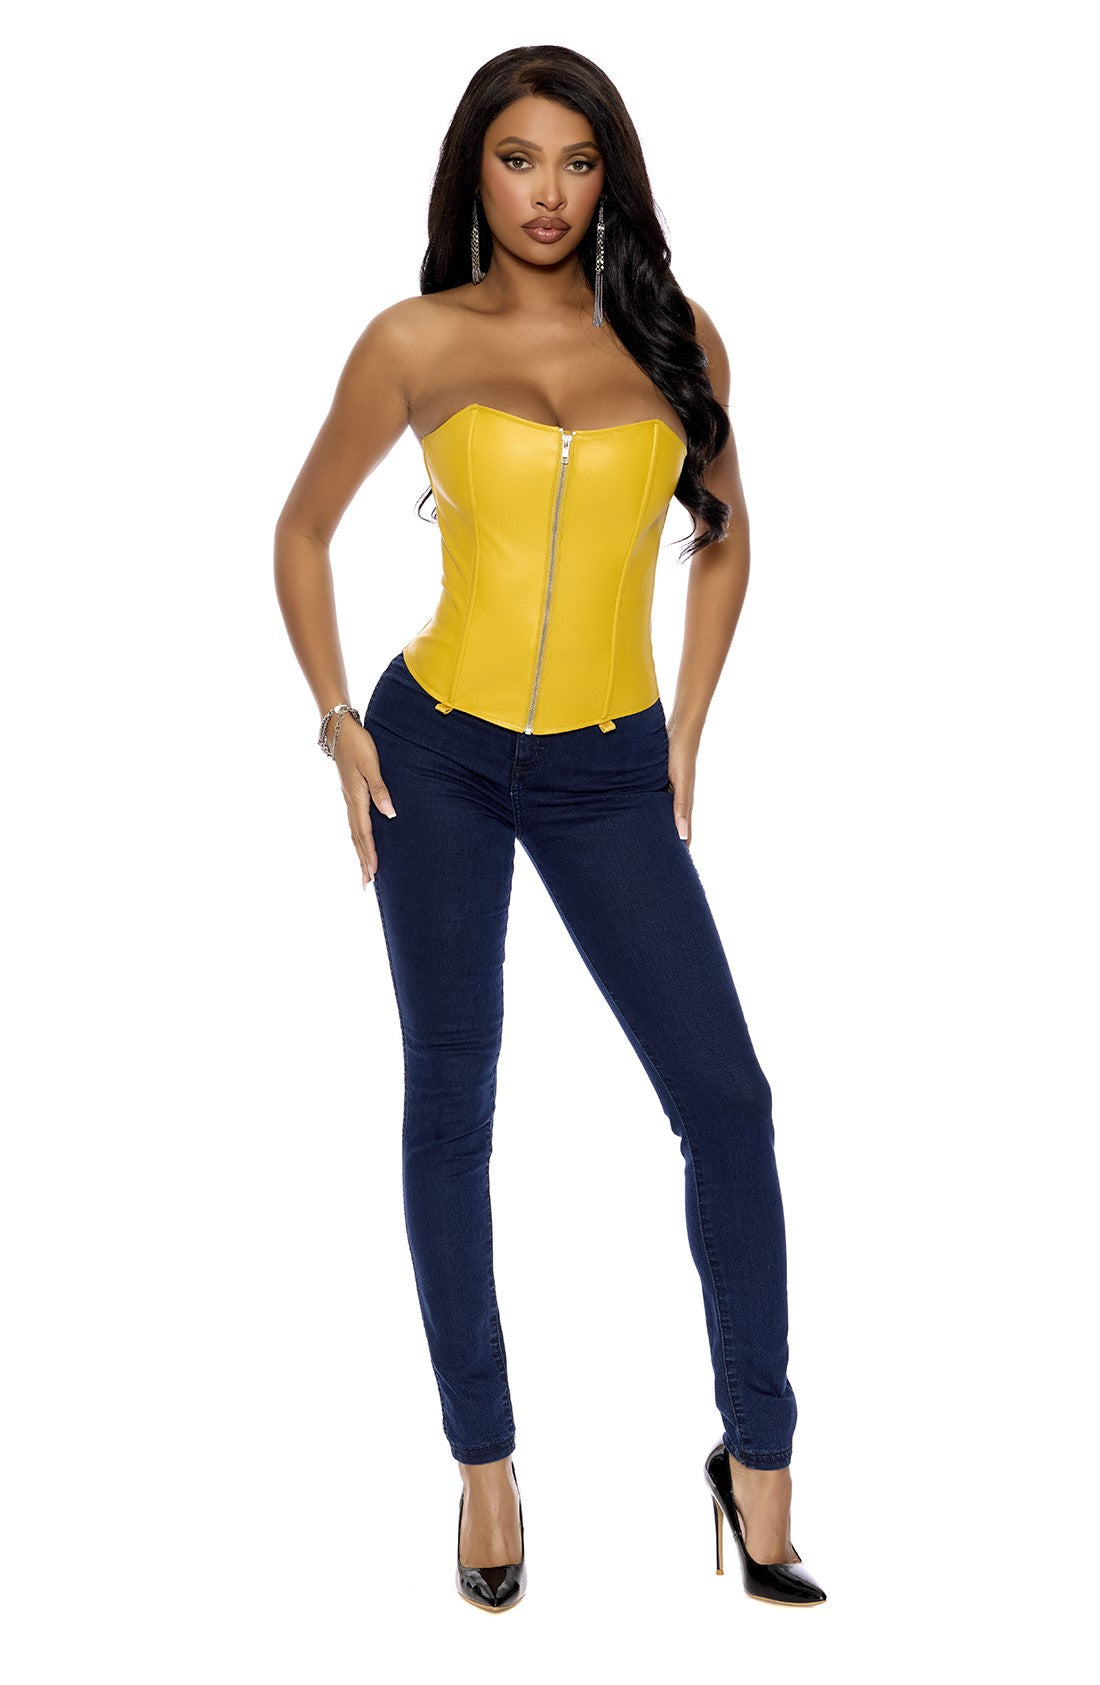 Spicy Leather yellow strapless bustier